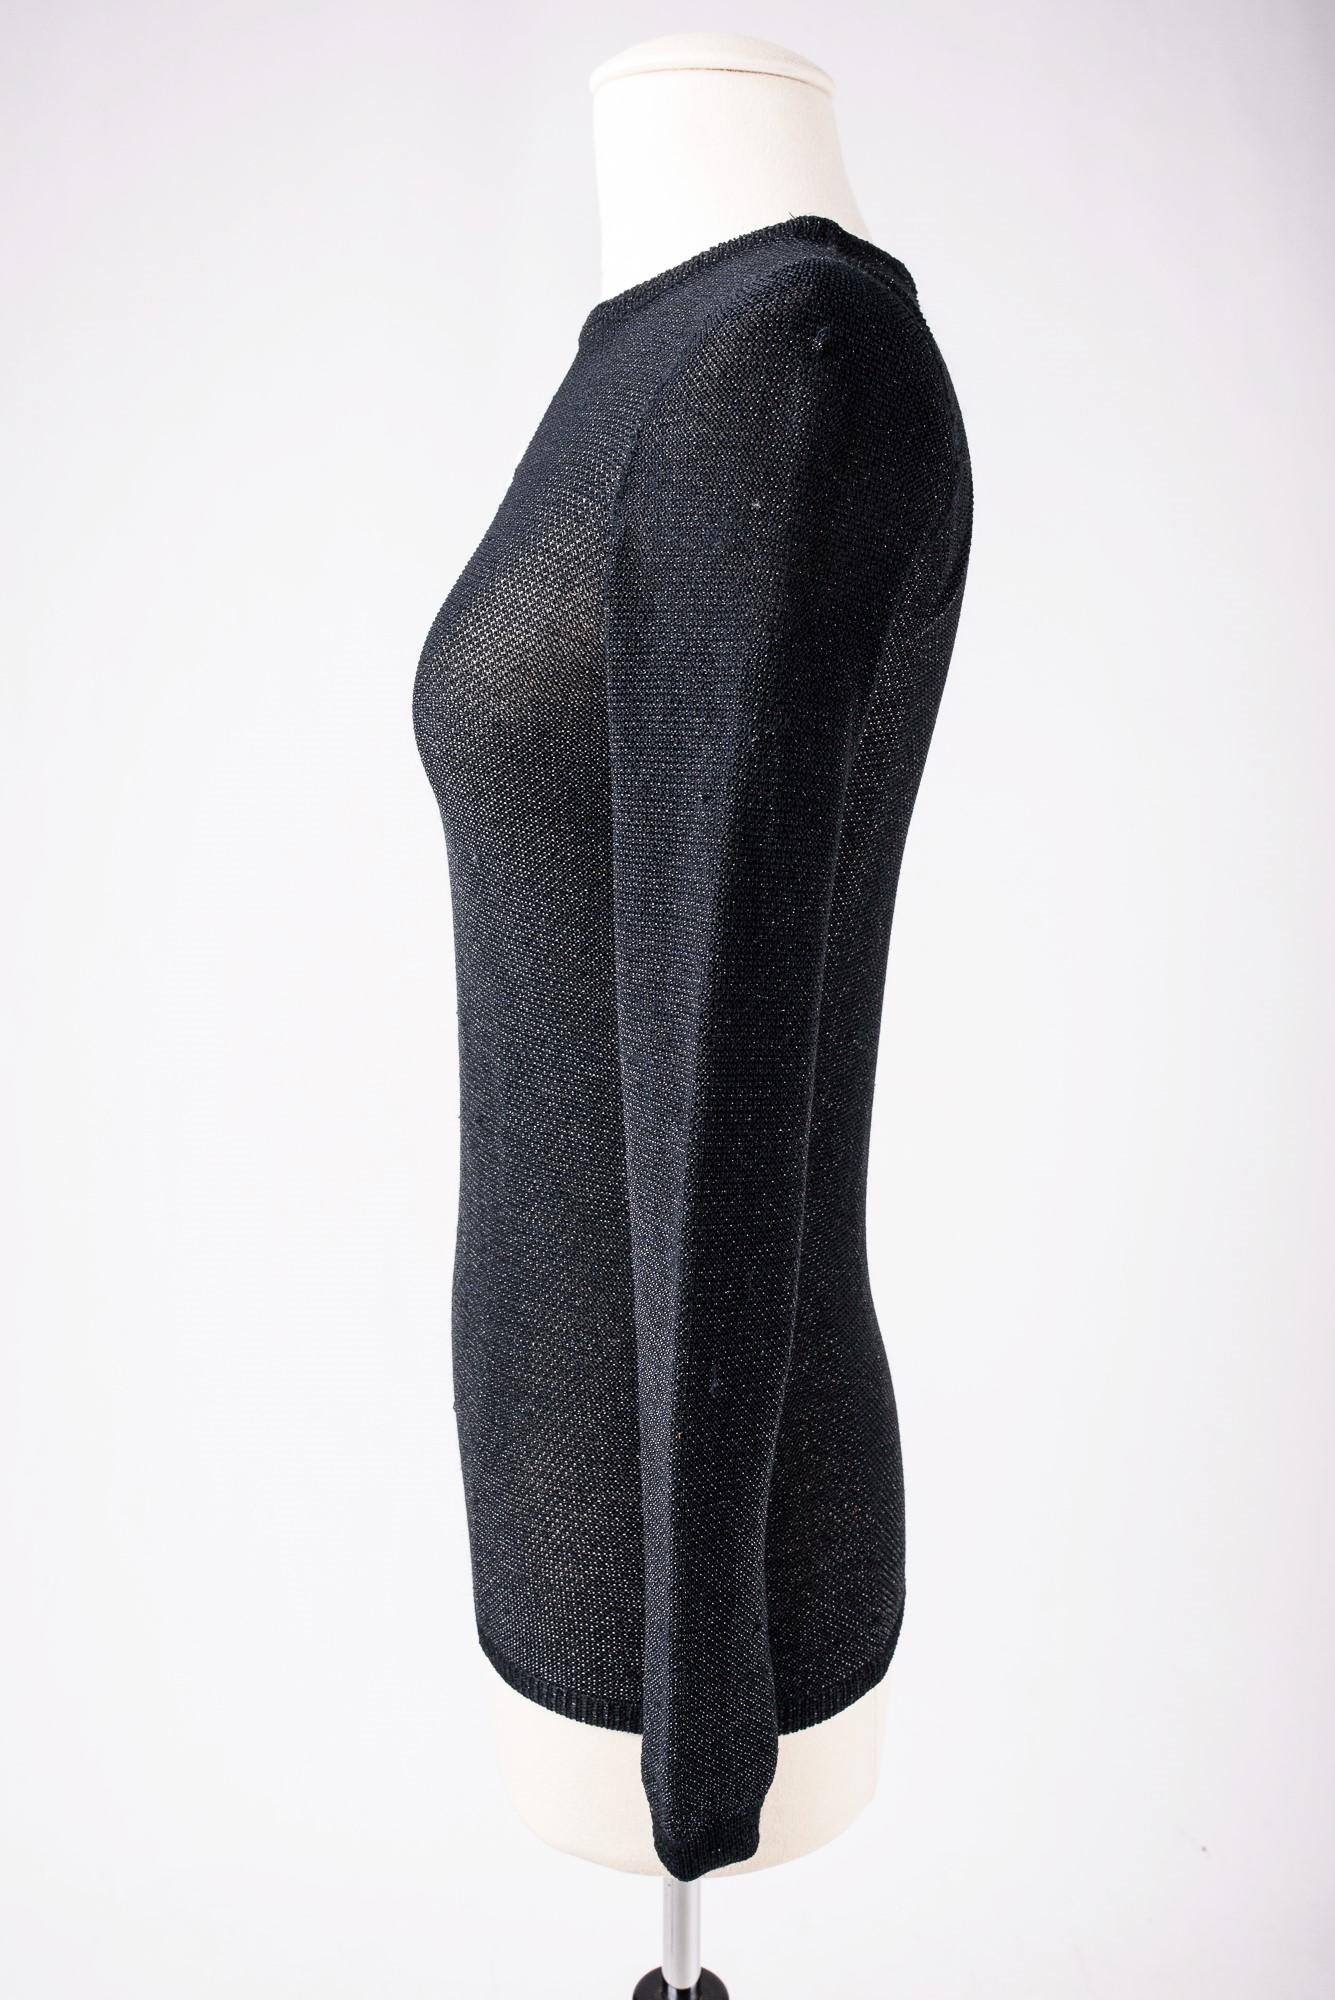 Silver lurex and knitted jumper by André Courrèges - France Circa 1970-1980 For Sale 4